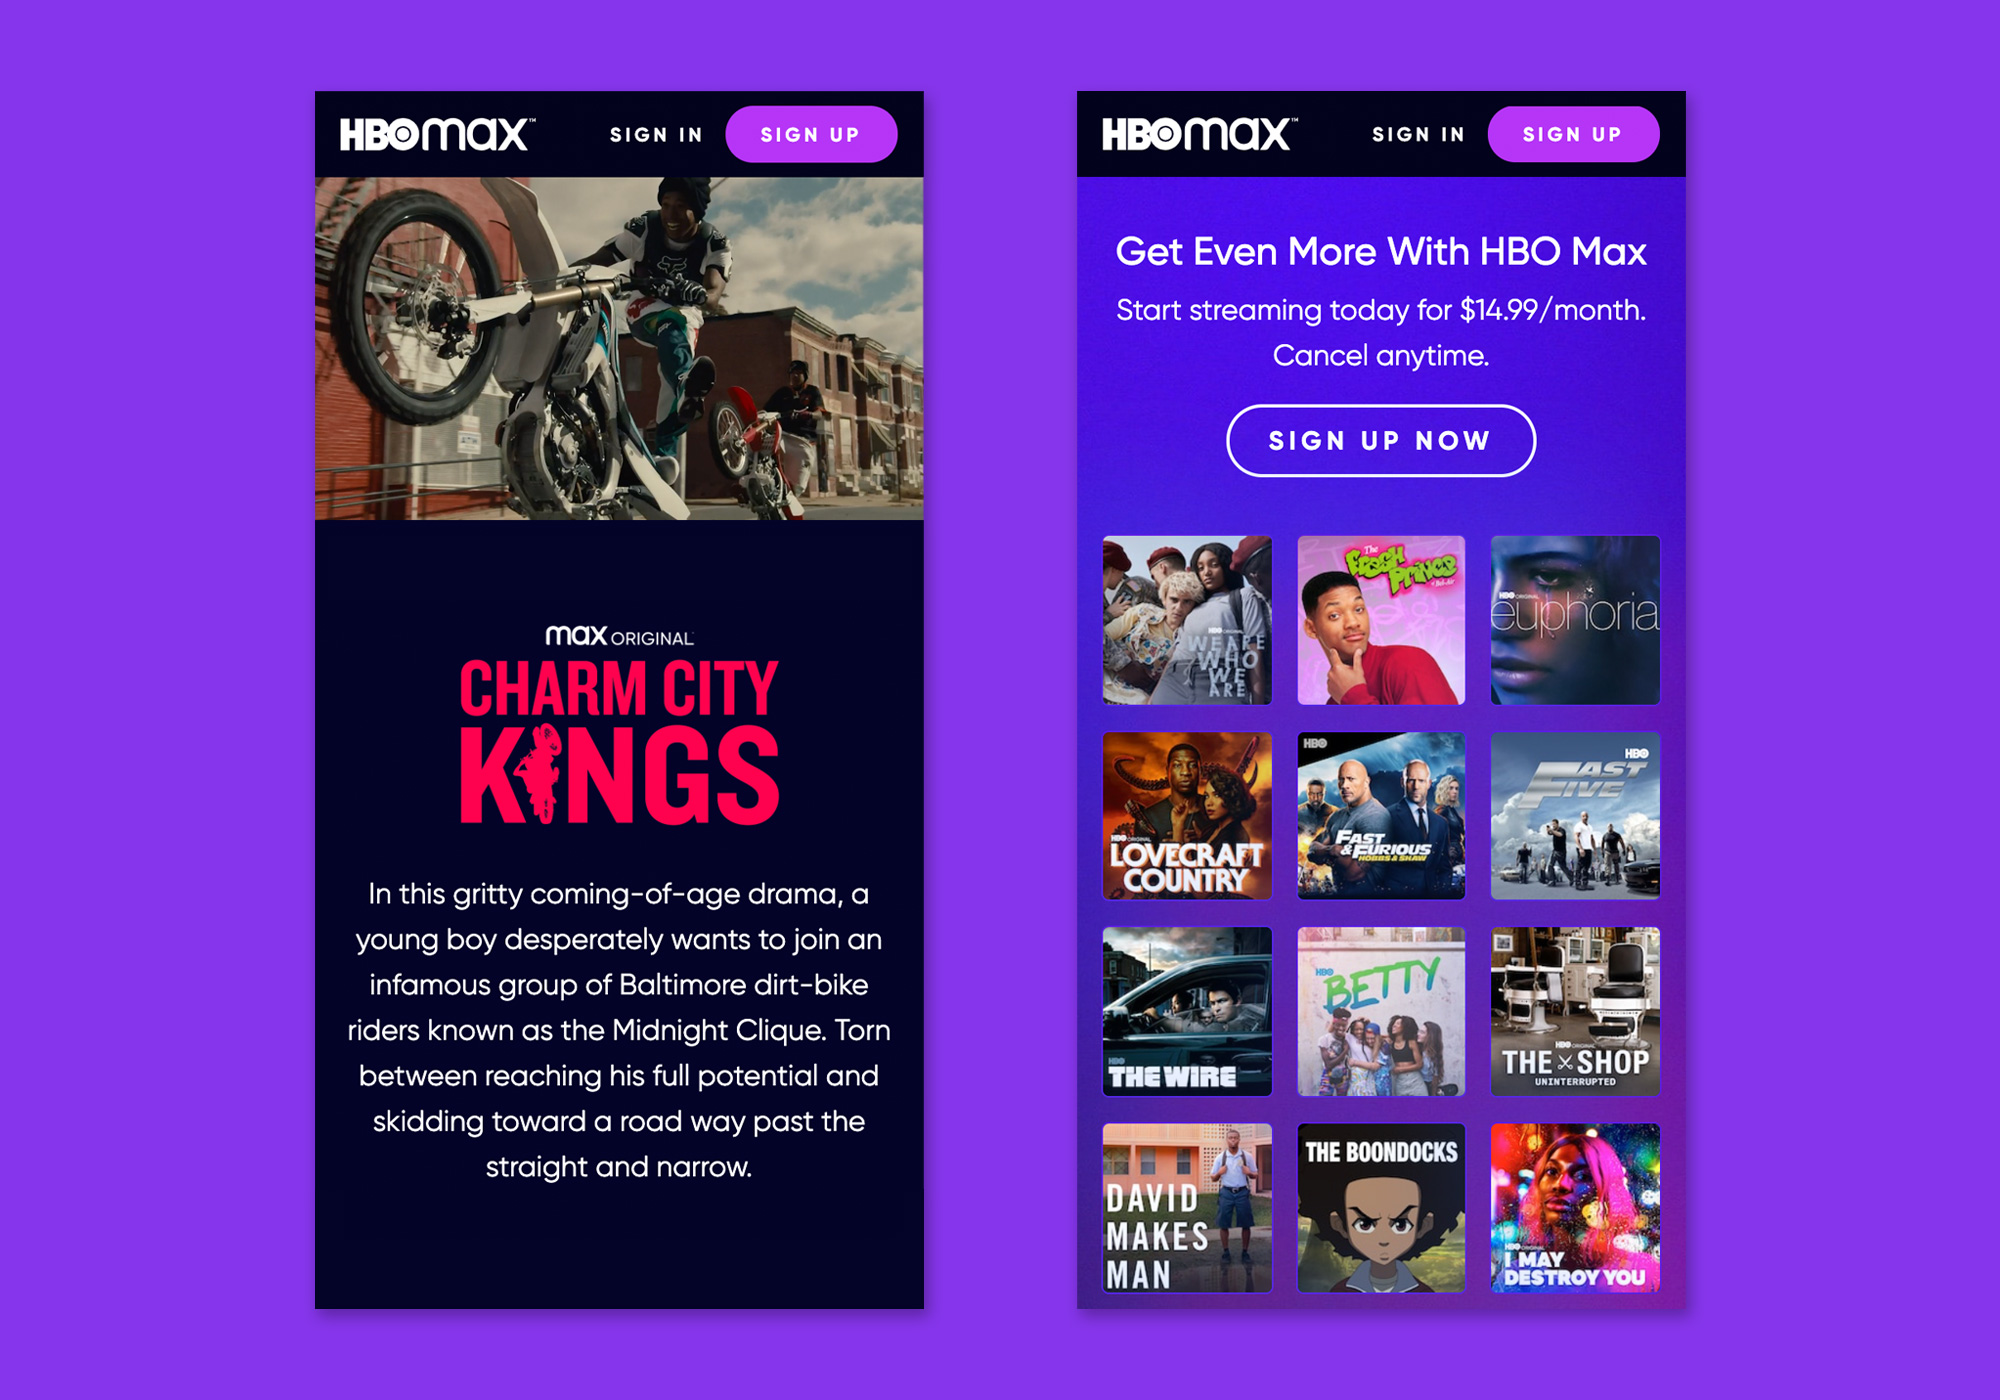 HBO Max | Charm City Kings Landing Page